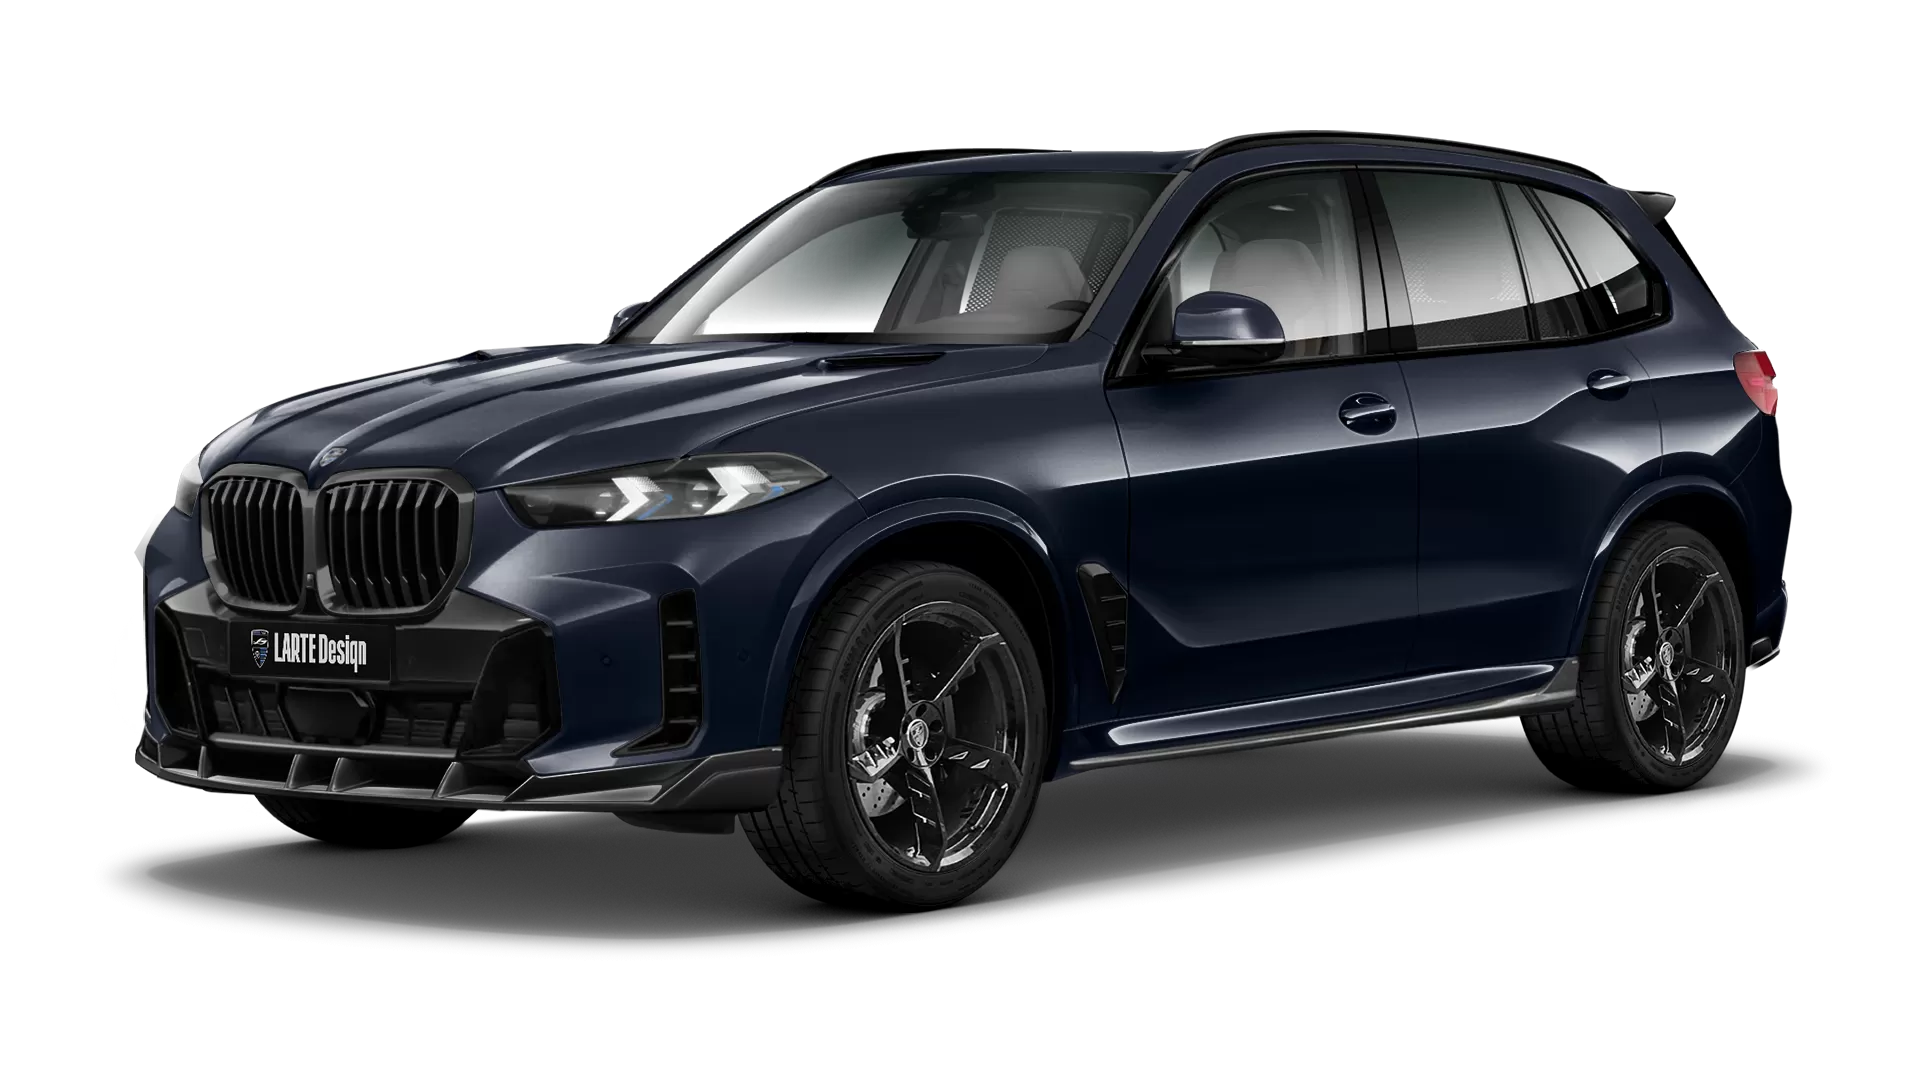 BMW X5 G05 LCI Facelift with painted body kit: front view shown in Black Carbon